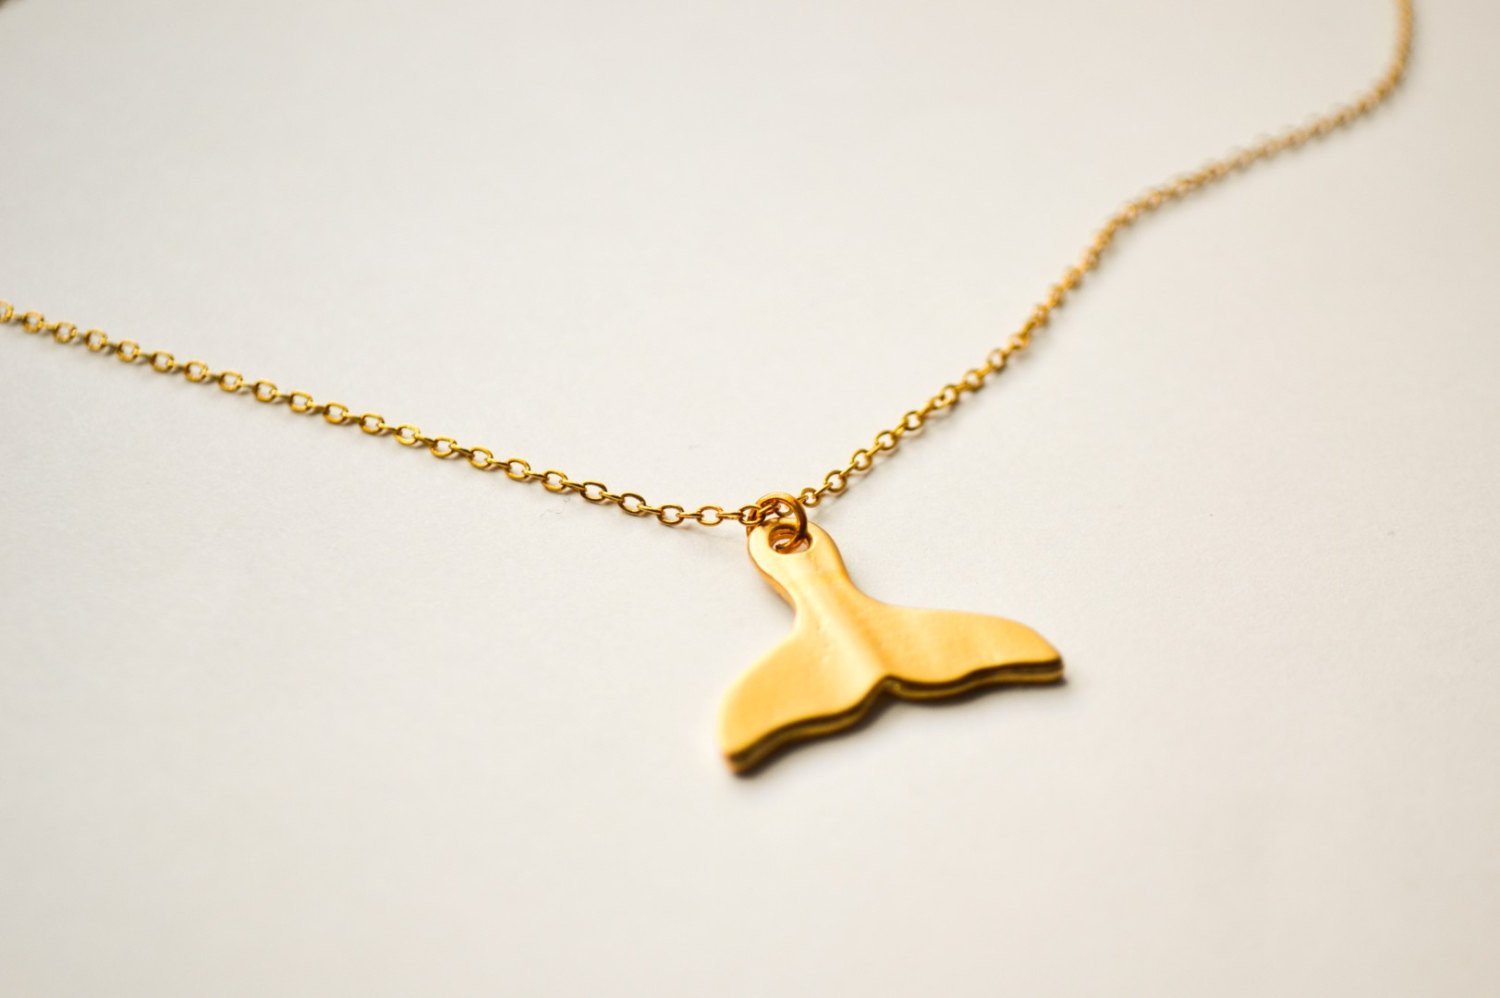 Whale's tail necklace, gold tone chain, gift for her - $21.00